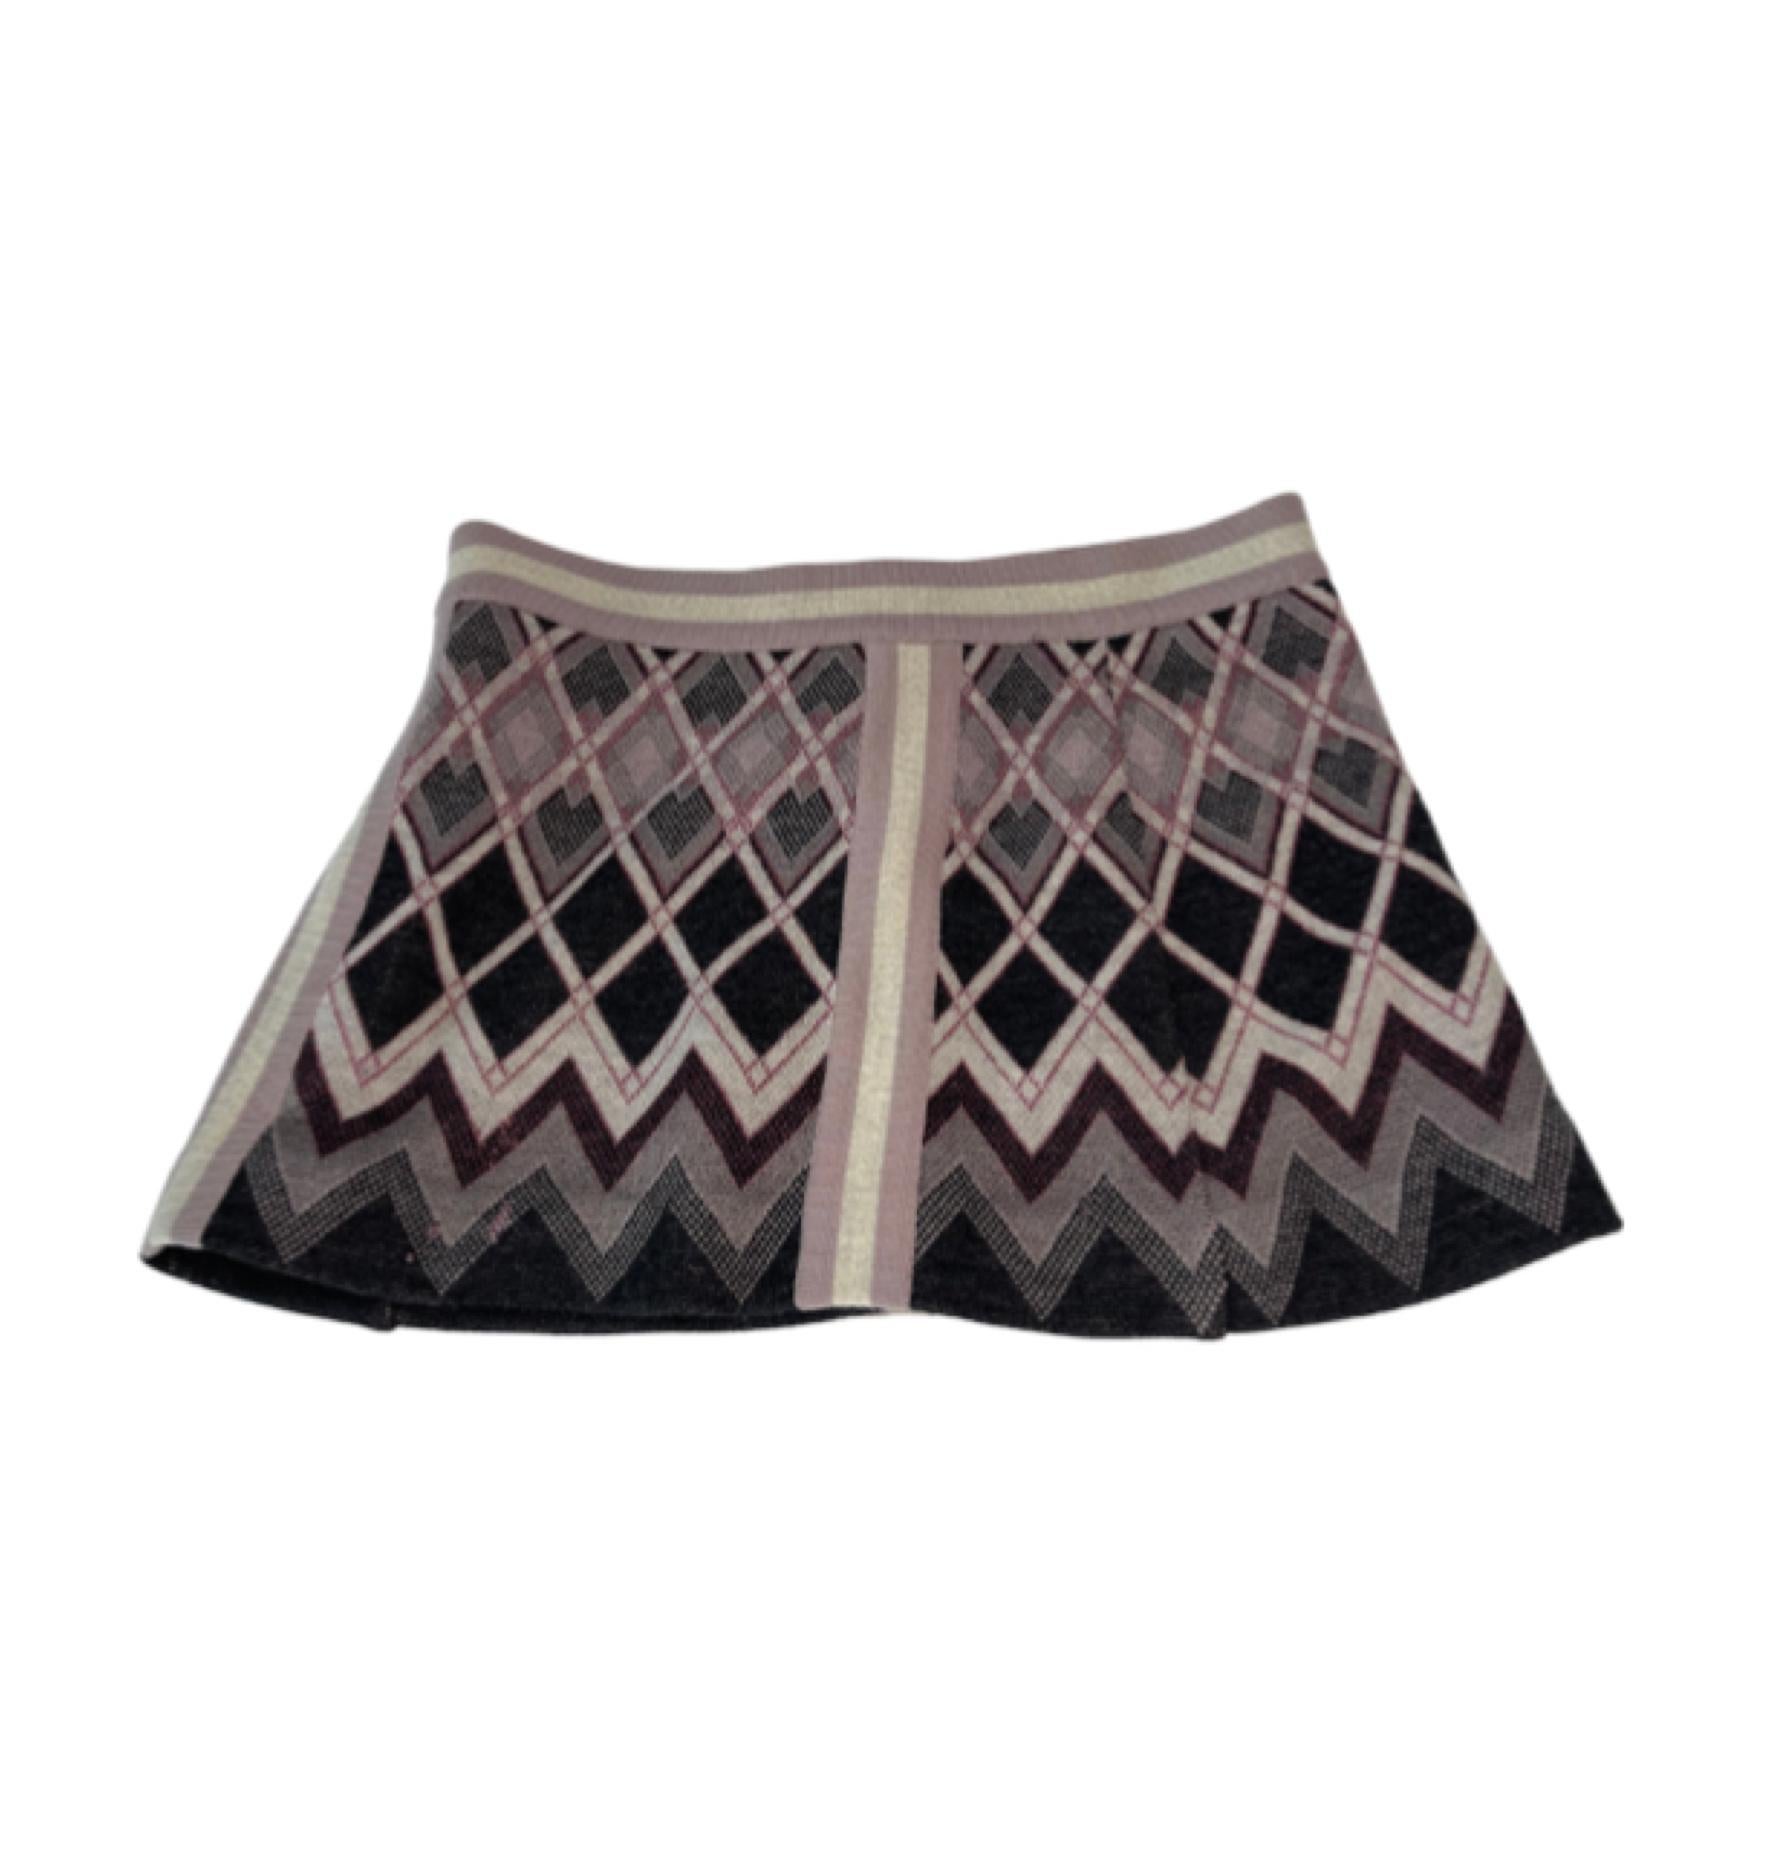 Missoni Knit Micro Skirt, lavendar/multi. A cute classic that can be paired with a t-shirt in the summer, or black stockings and turtlenecks in the fall.

COLOR: Black and grey
MATERIAL: 70% wool, 30% viscose, LINING: 85% rayon, 15% elastane.
SIZE: